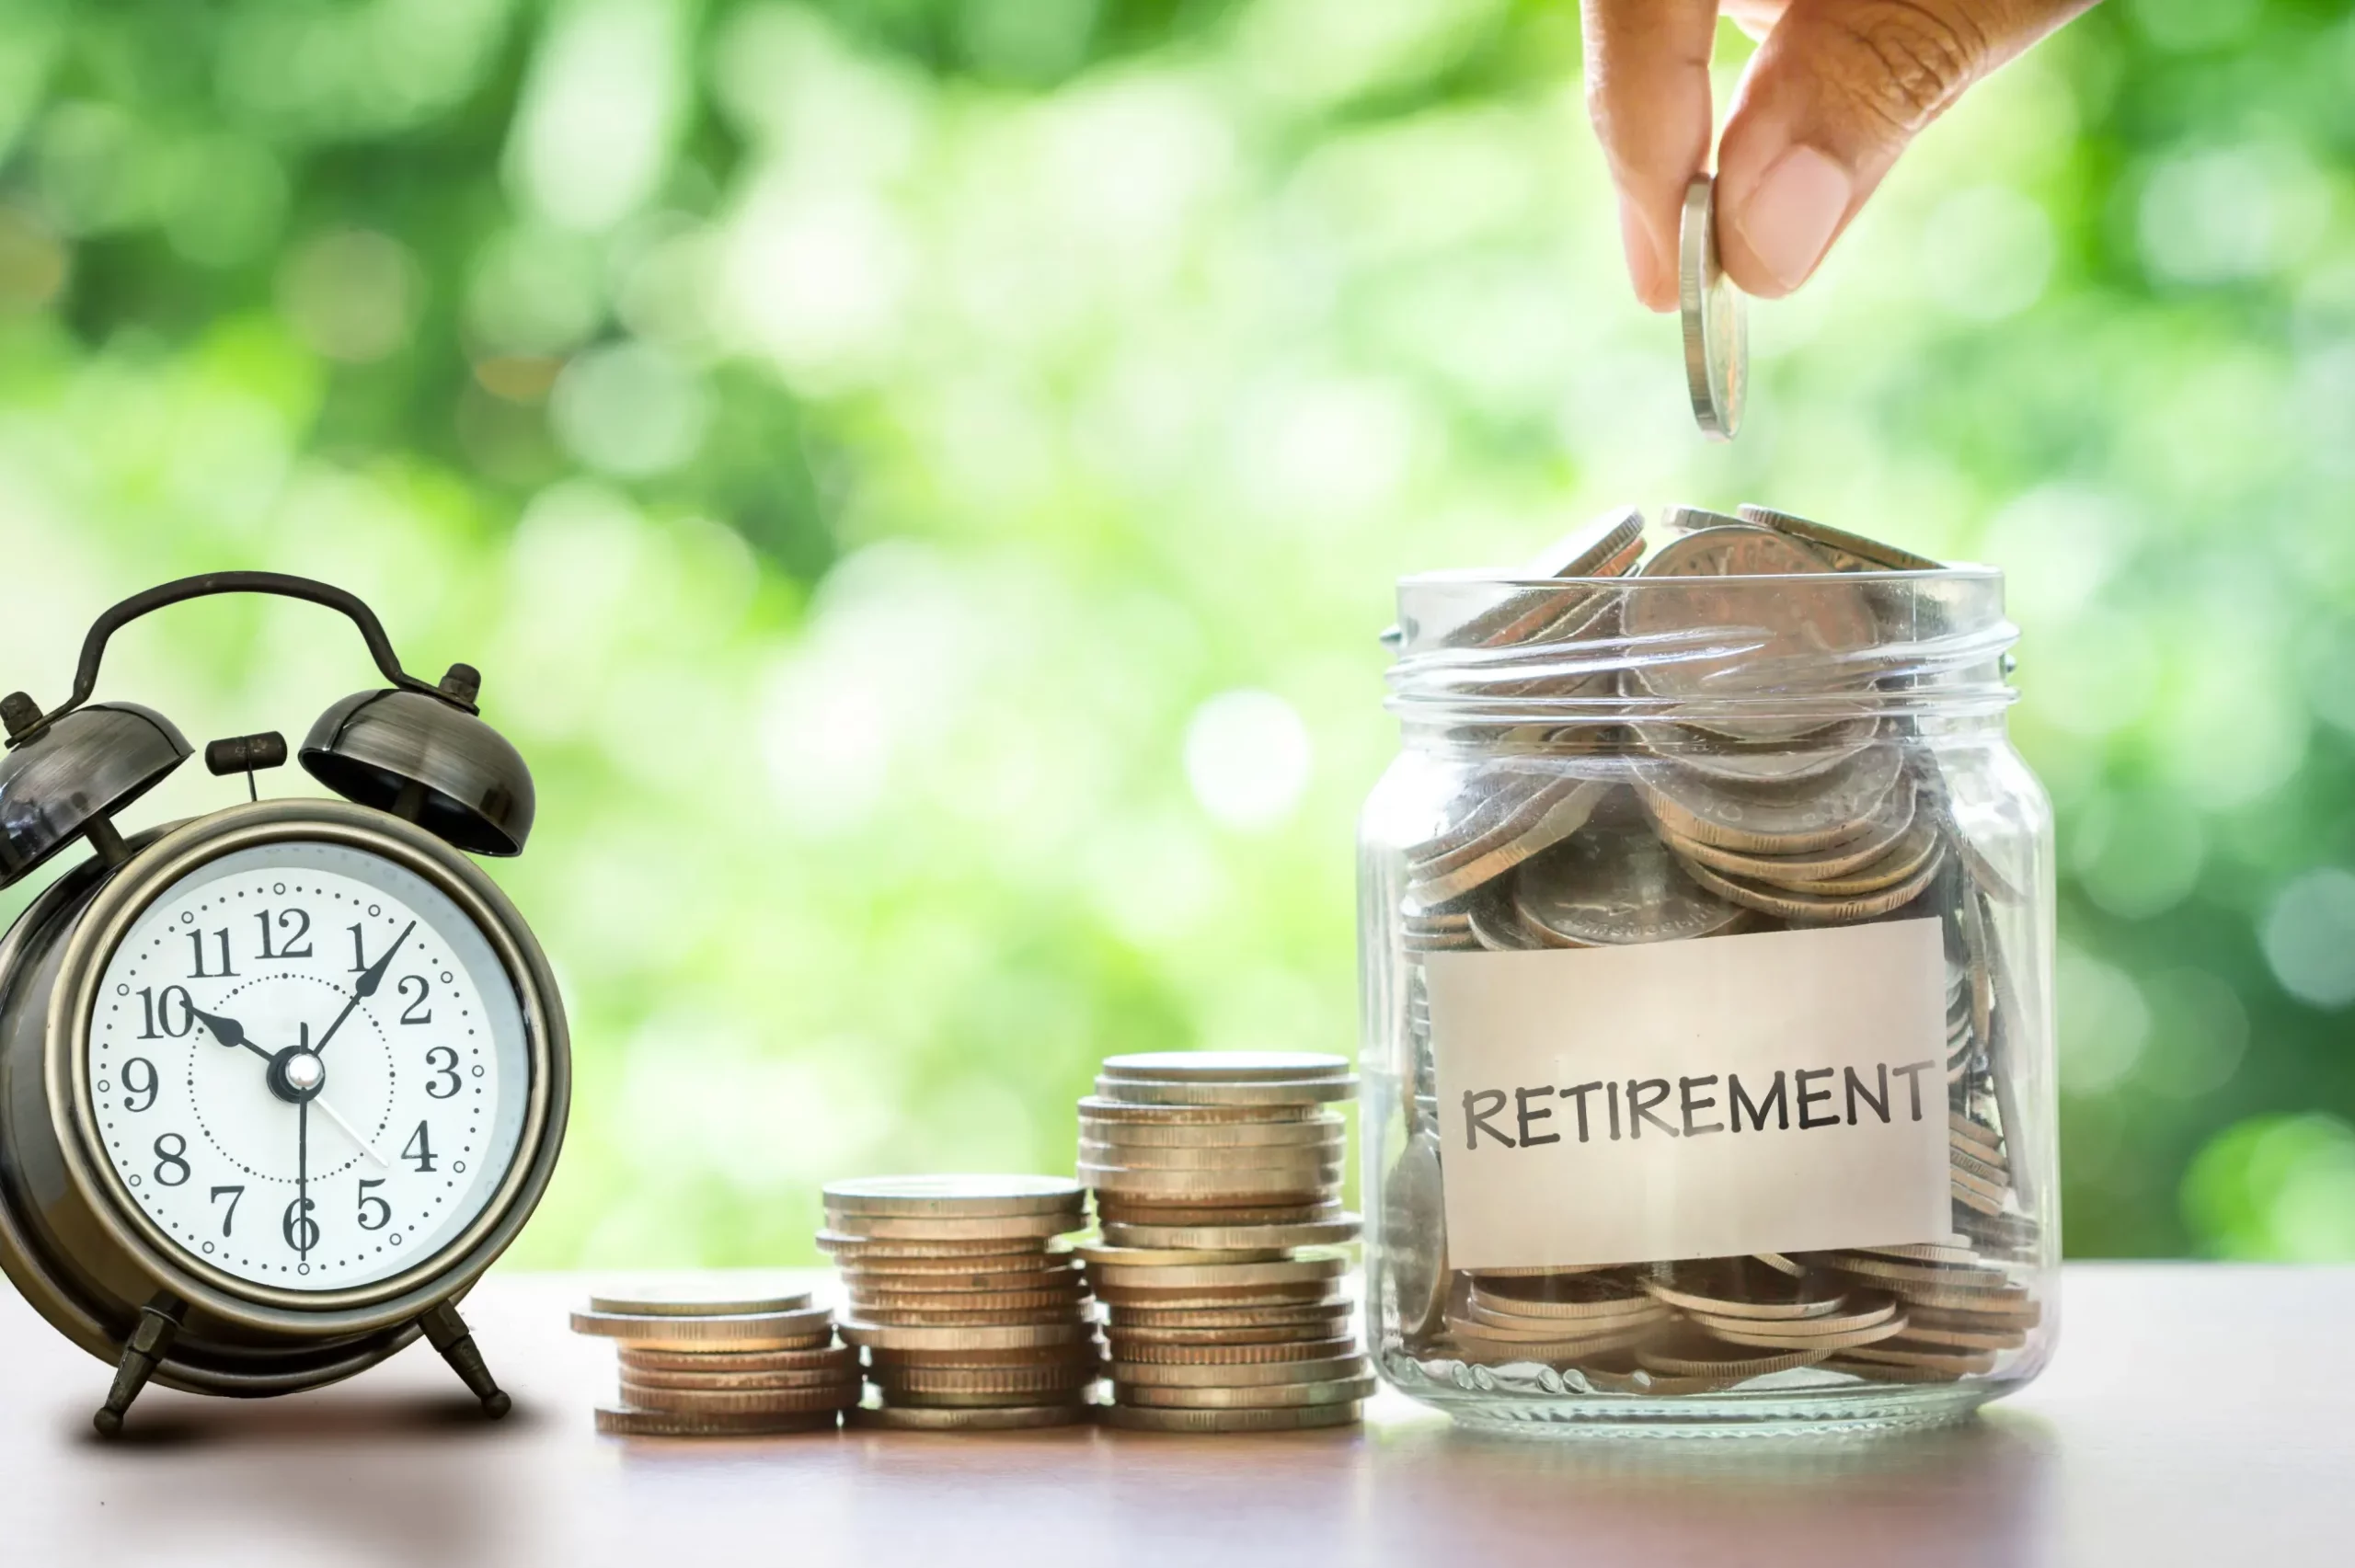 Chasing the retirement dream: The uphill battle for American workers and the push for the Retirement Savings for Americans Act